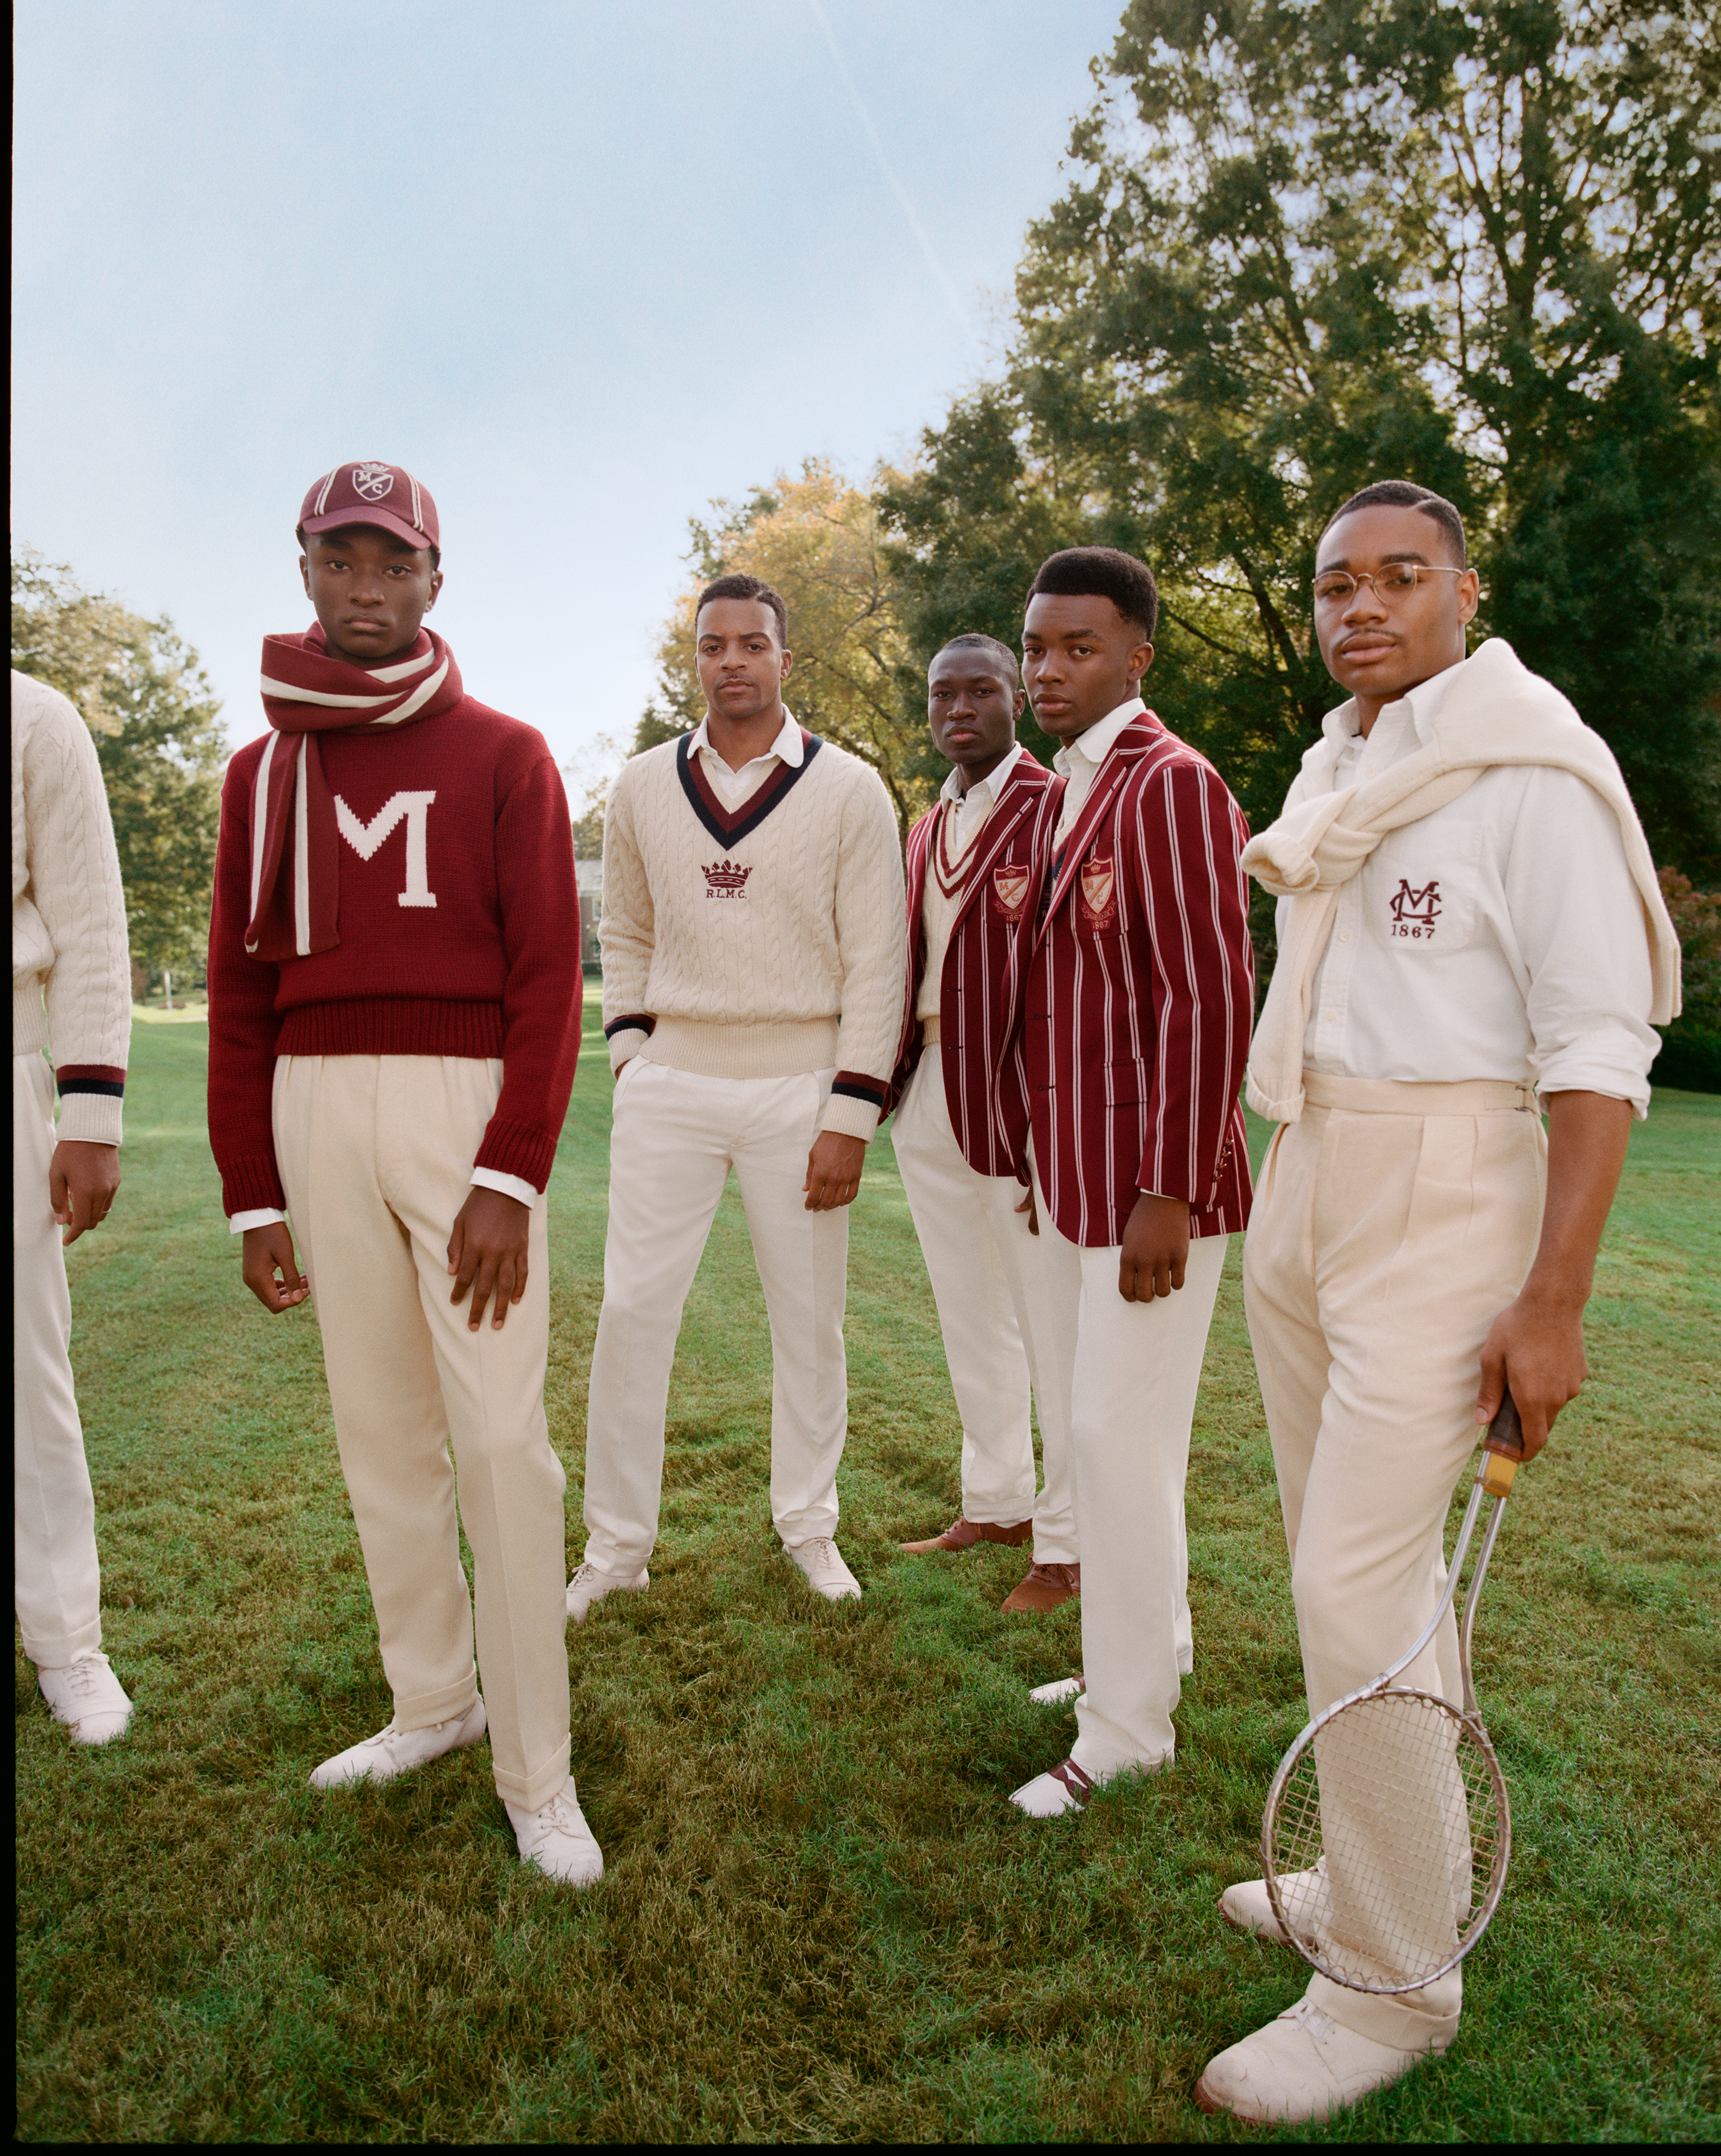 Vertrappen Volgen Tirannie New Ralph Lauren collection honors 'heritage and traditions' of Black  colleges - CNN Style